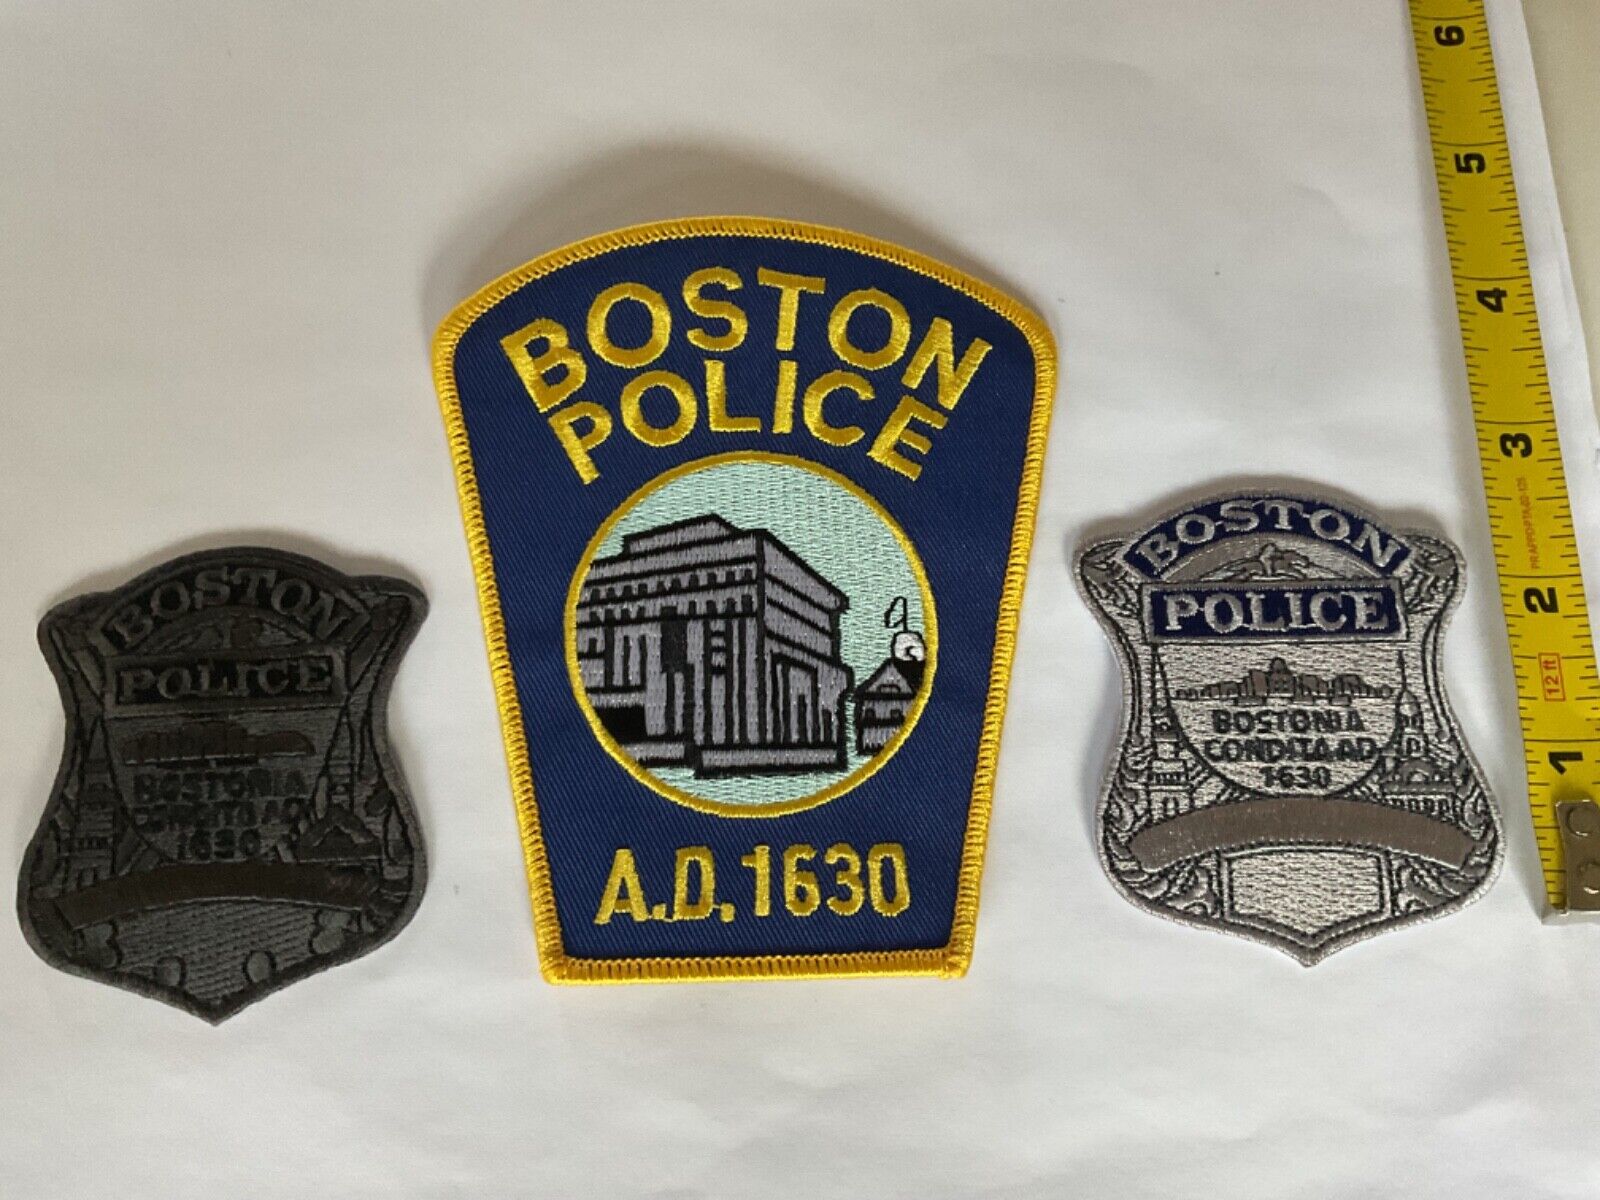 Boston Police Massachusetts Patch Set all new condition.